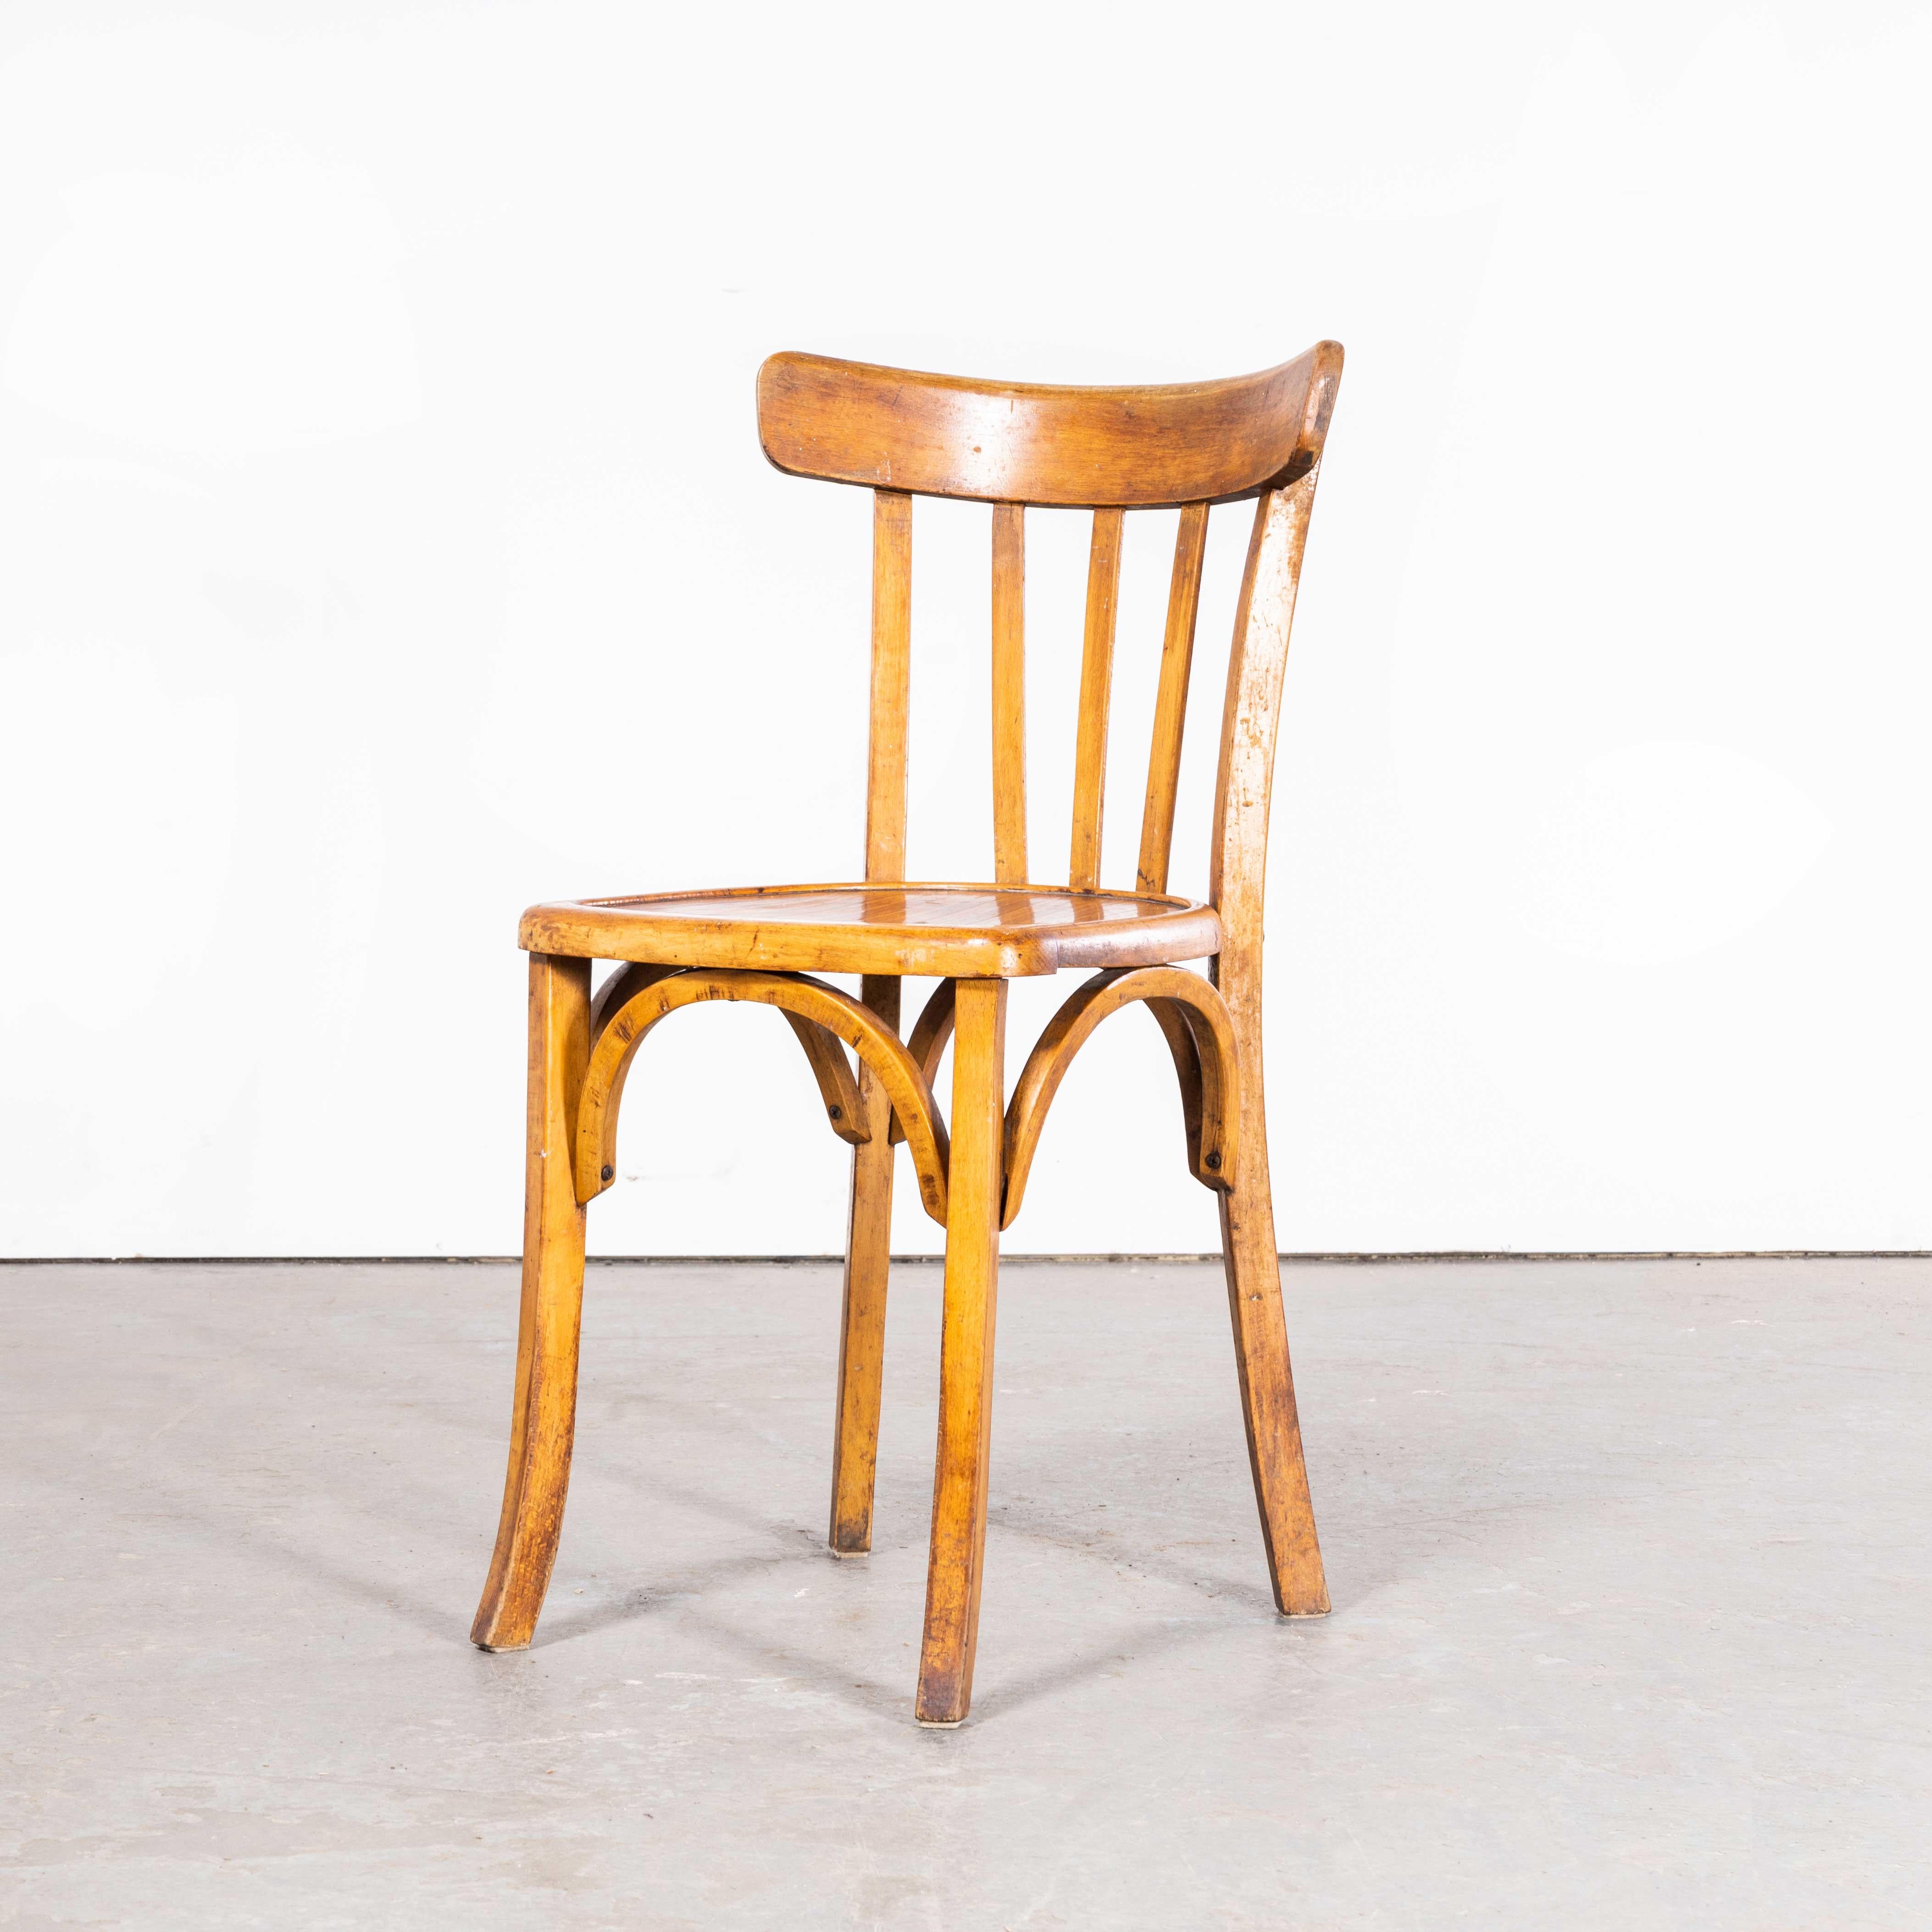 1950’s Luterma Honey Oak Bentwood Dining Chair – Set Of Six
1950’s Luterma Honey Oak Bentwood Dining Chair – Set Of Six. The process of steam bending beech to create elegant chairs was discovered and developed by Thonet, but when its patents expired